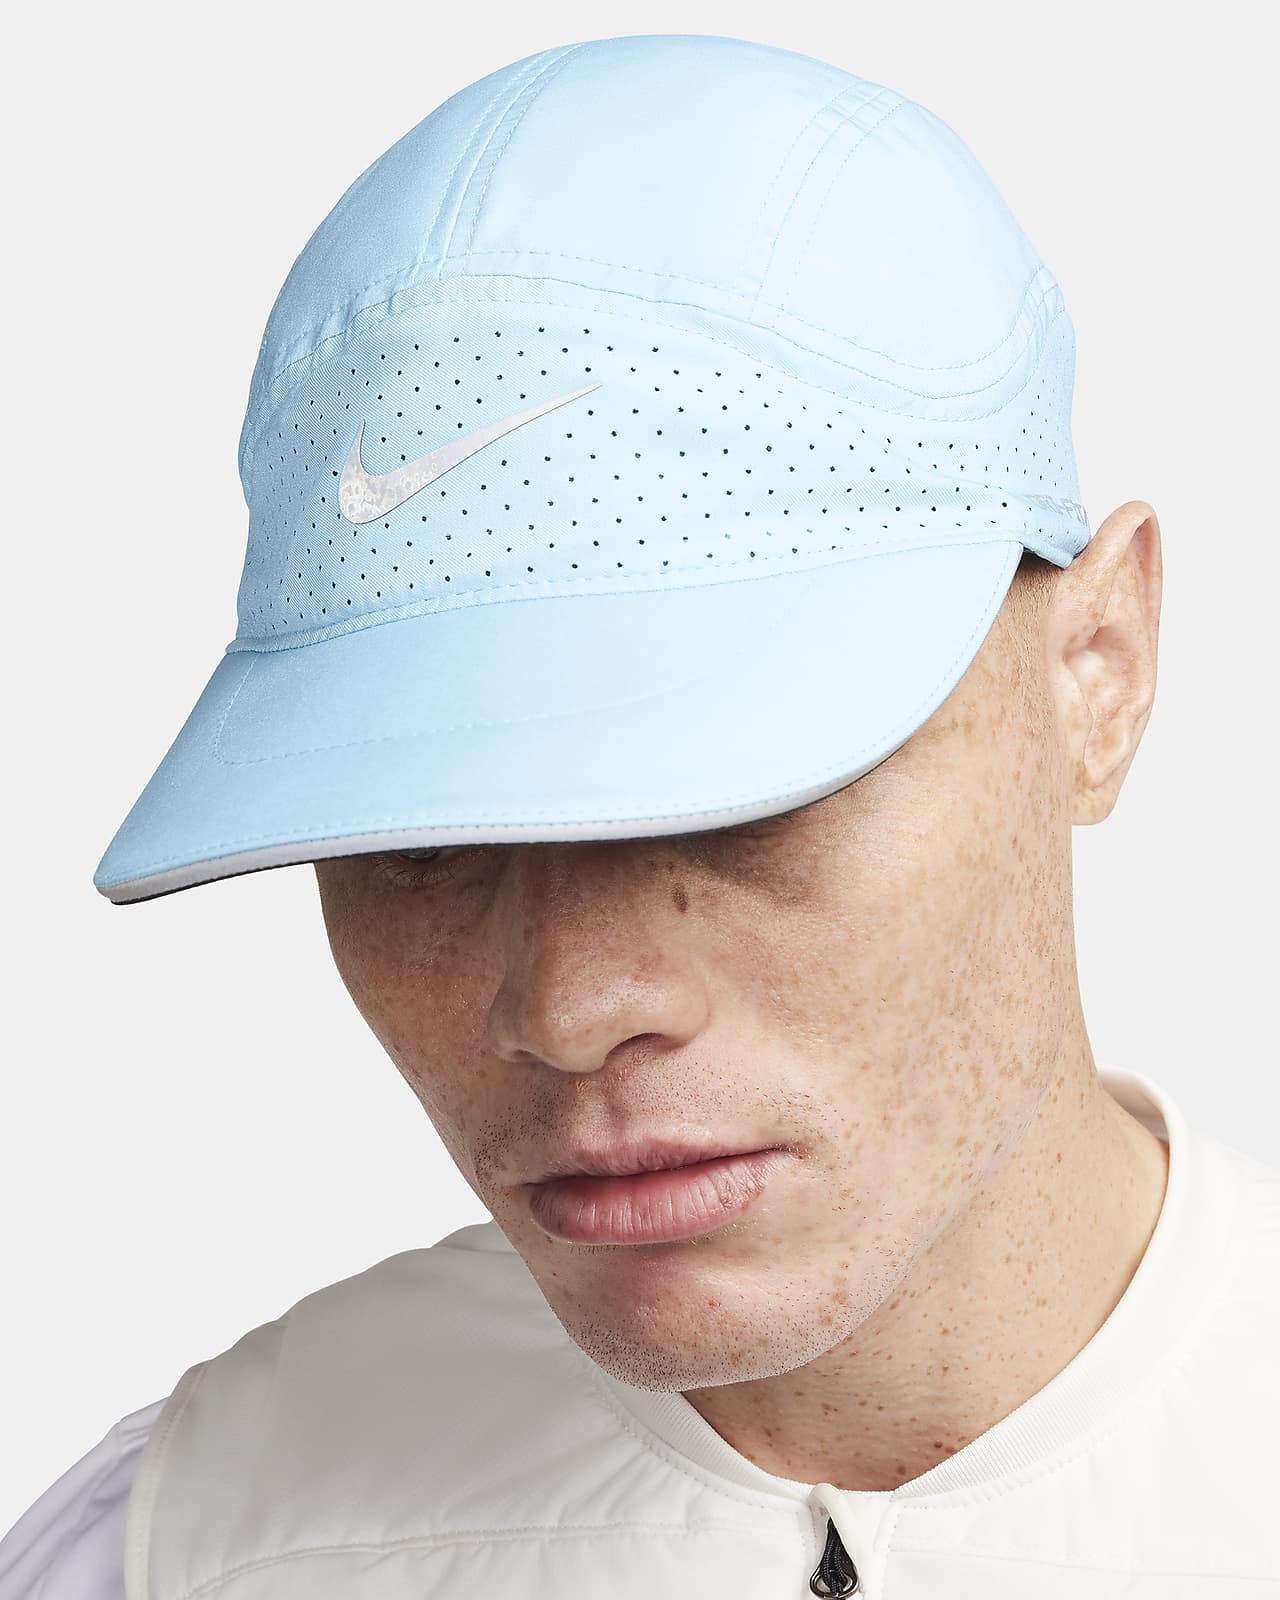 Nike Dri-FIT ADV Fly Unstructured Reflective Cap